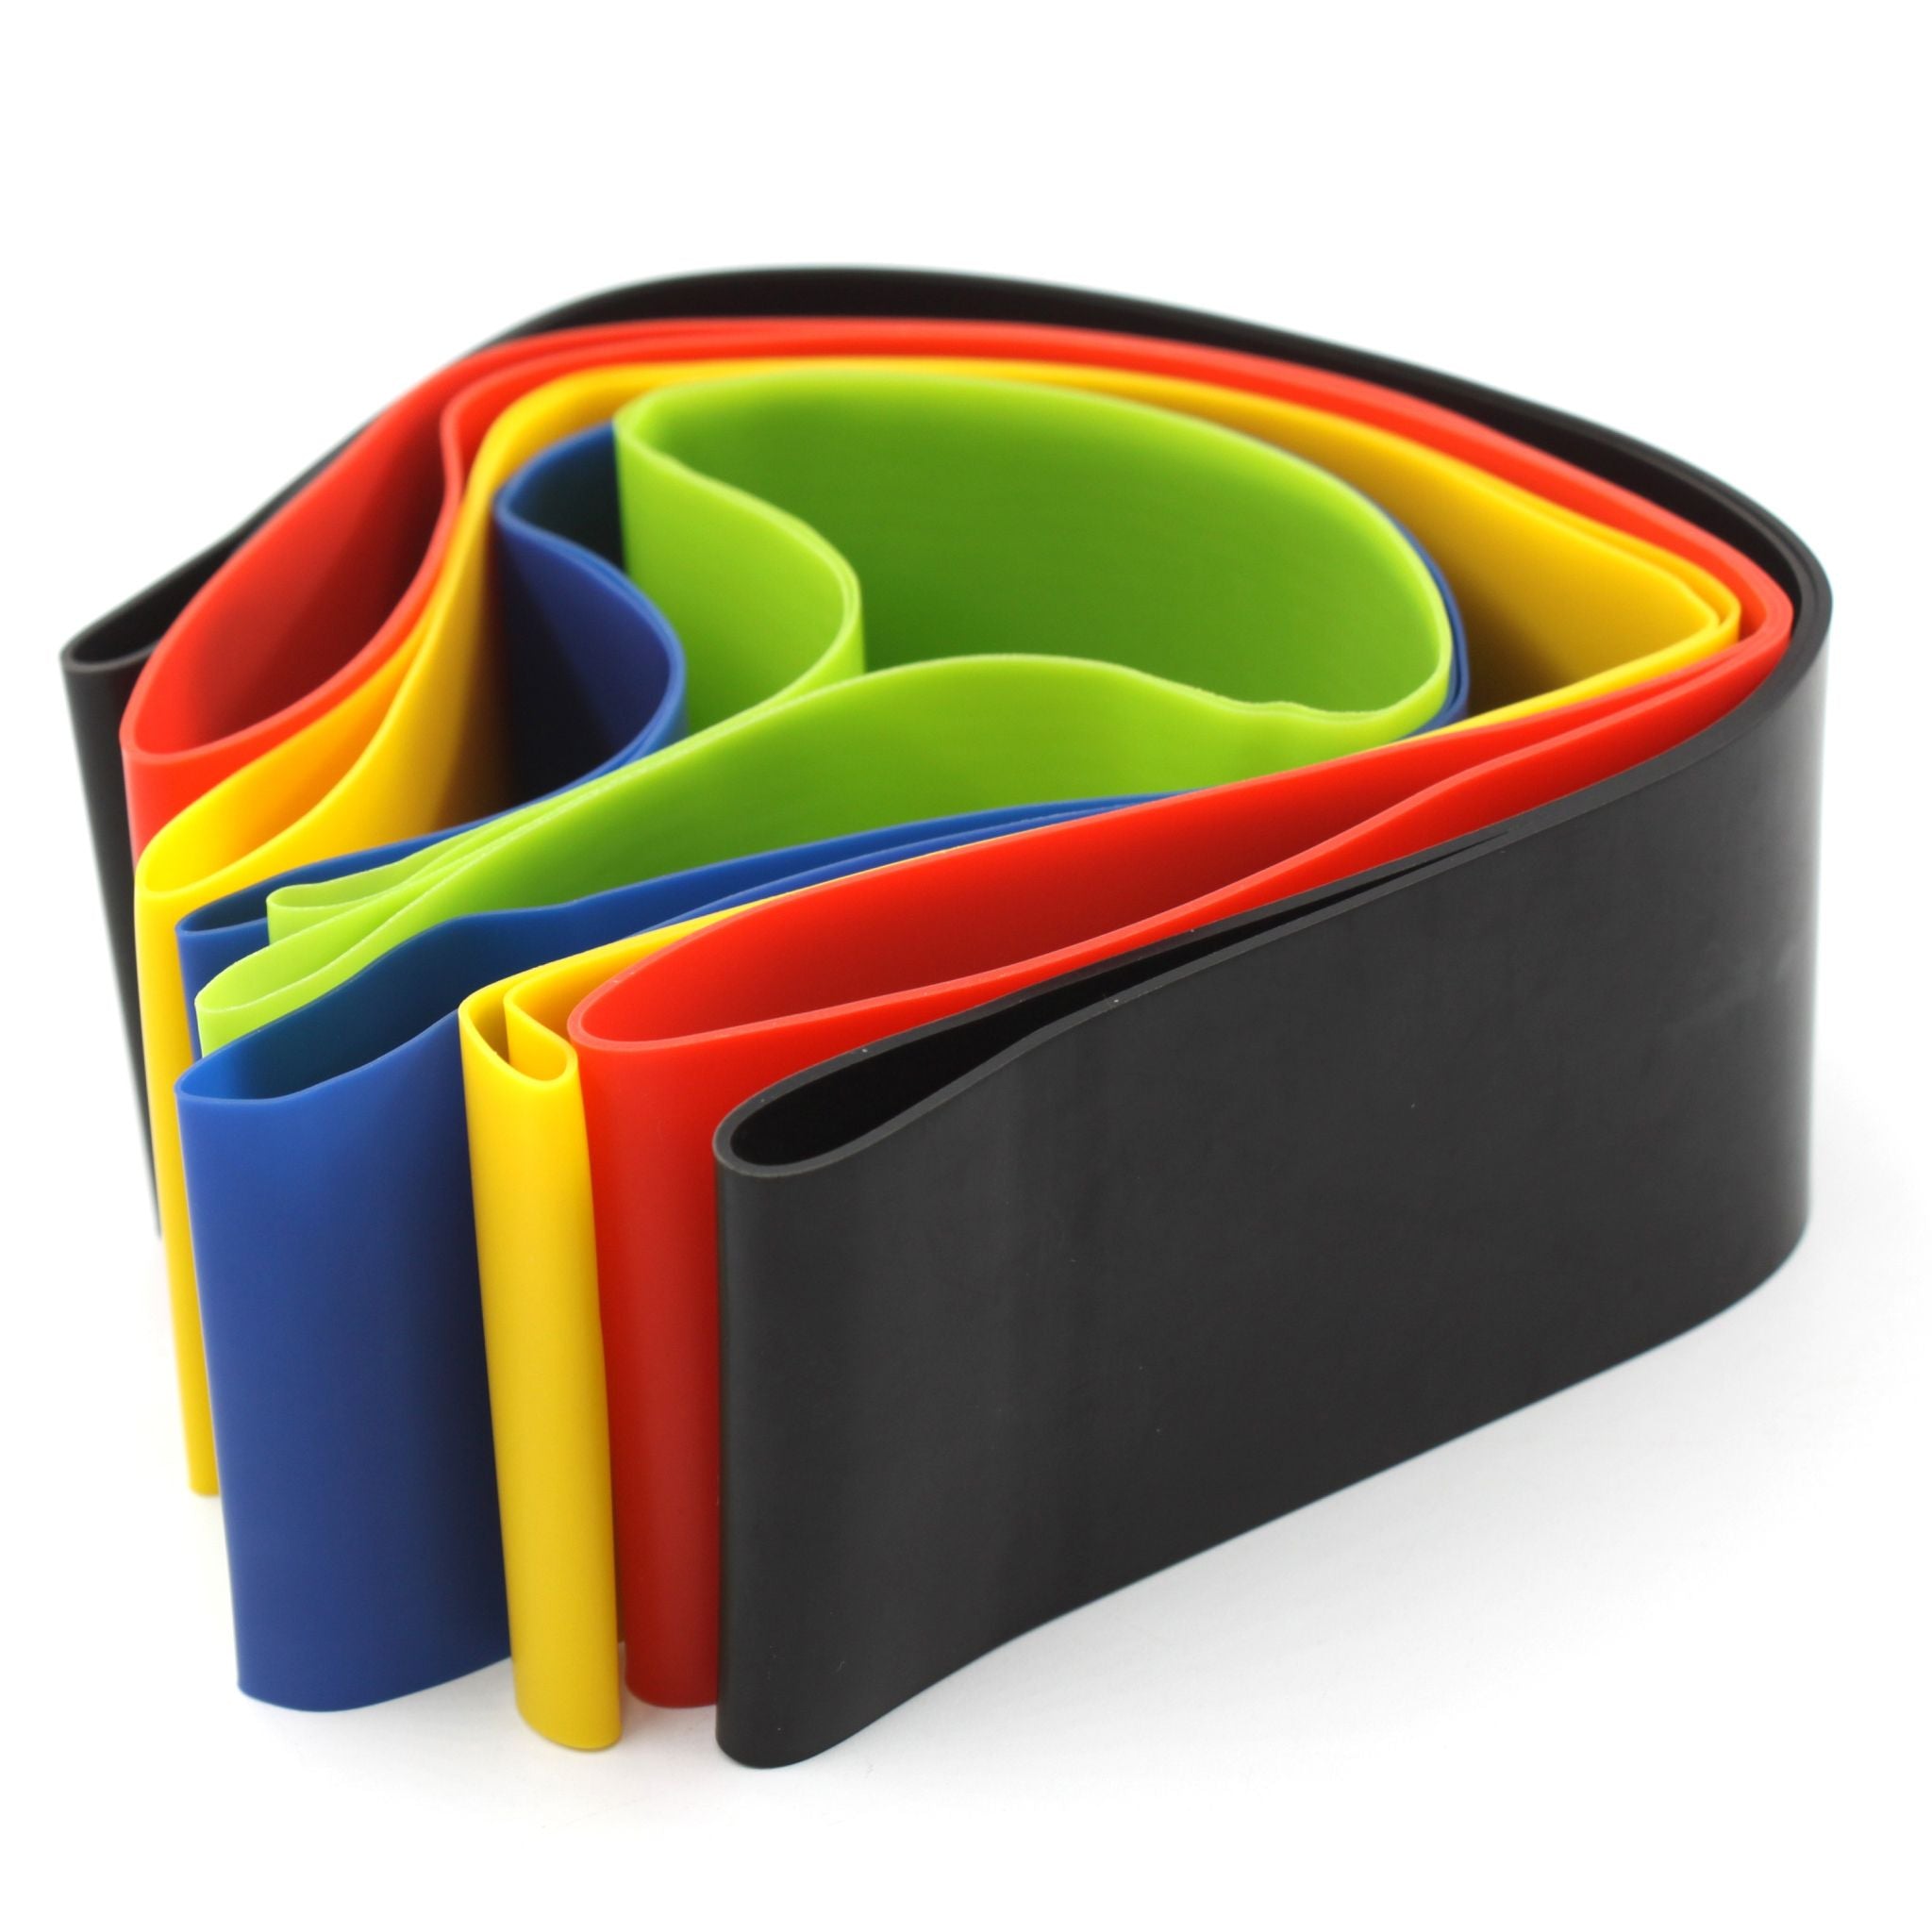 Multi-Colored Resistance Bands Folded Together at Express Gym Supply